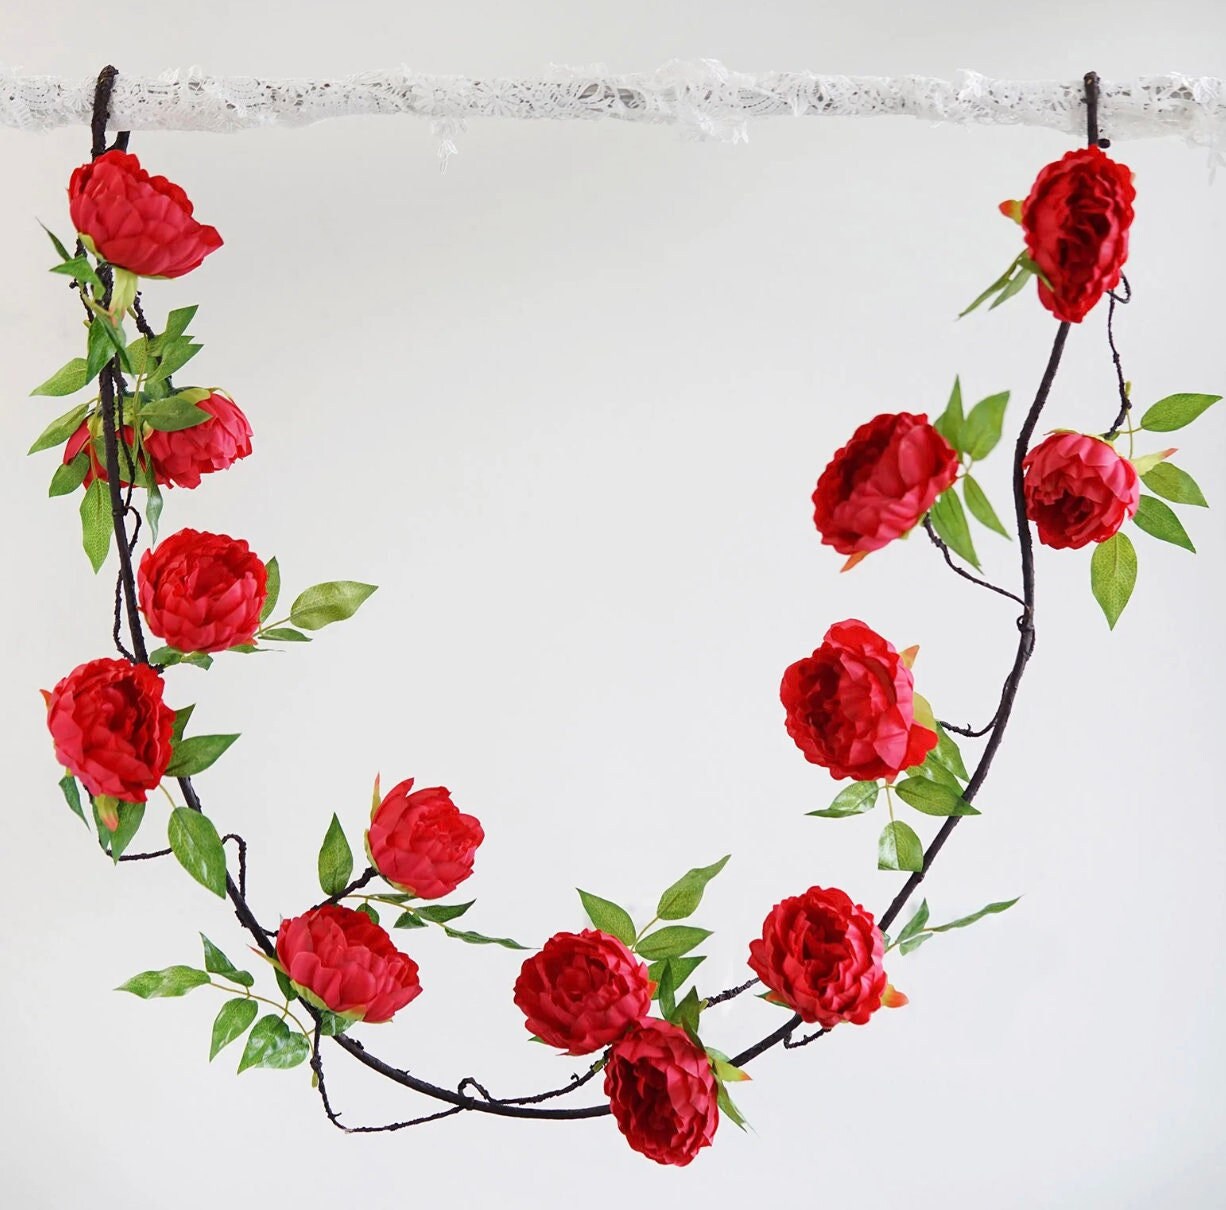 6 FT. Red Peony Garland Vine Spring Decor Easter Floral Arrangements Wedding Ceremony Outdoor Hanging Flowers Red Faux Peony Flower Sale